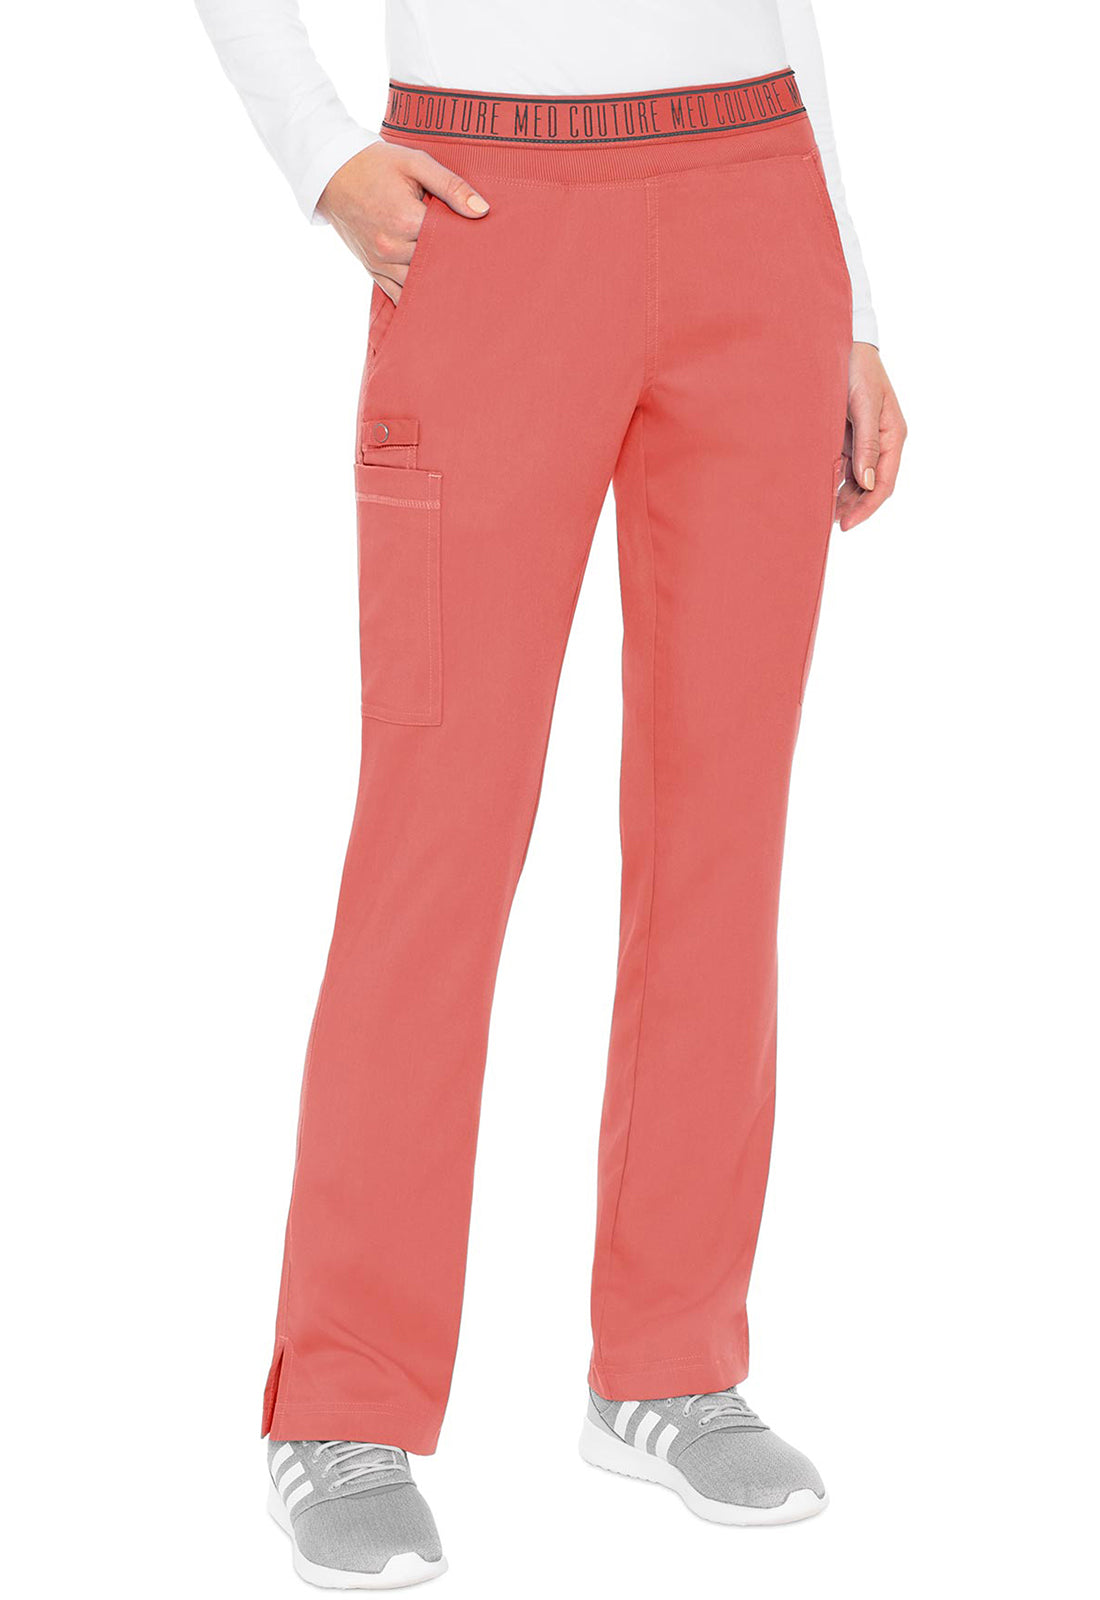 Med Couture Touch Yoga 2 Cargo Pocket Pant (16 Colors XS-2XL Regular Length)